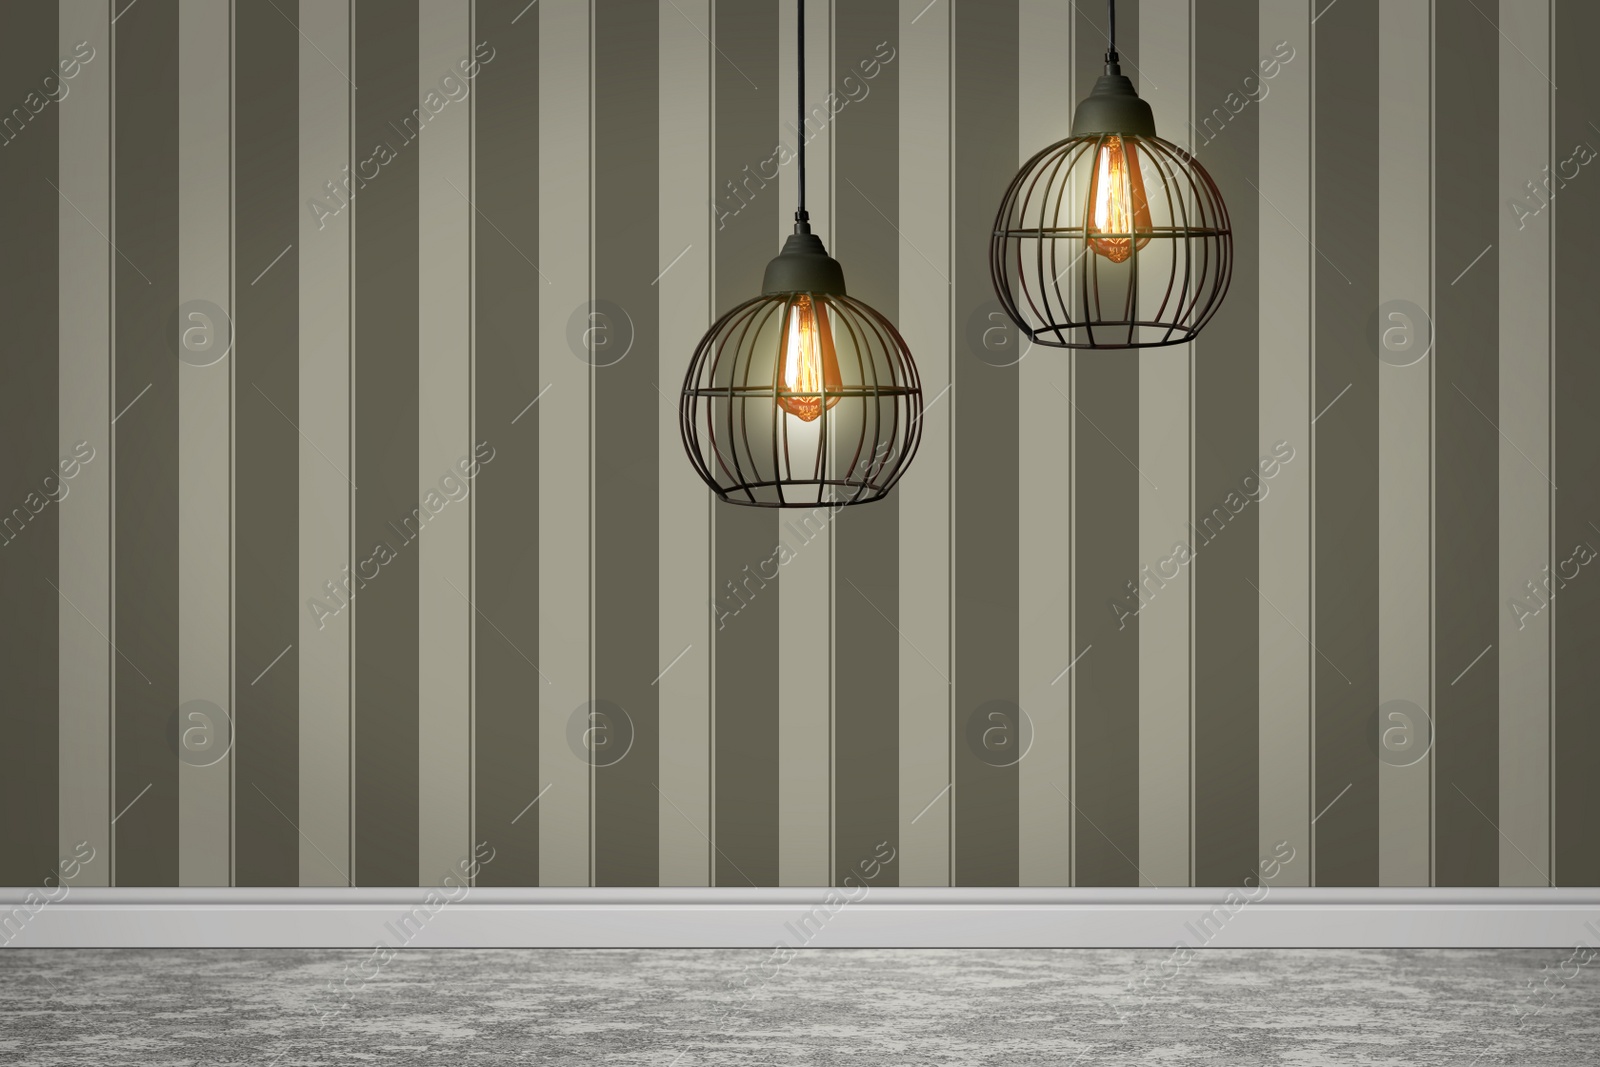 Image of Stylish pendant lamps hanging near striped wall in room